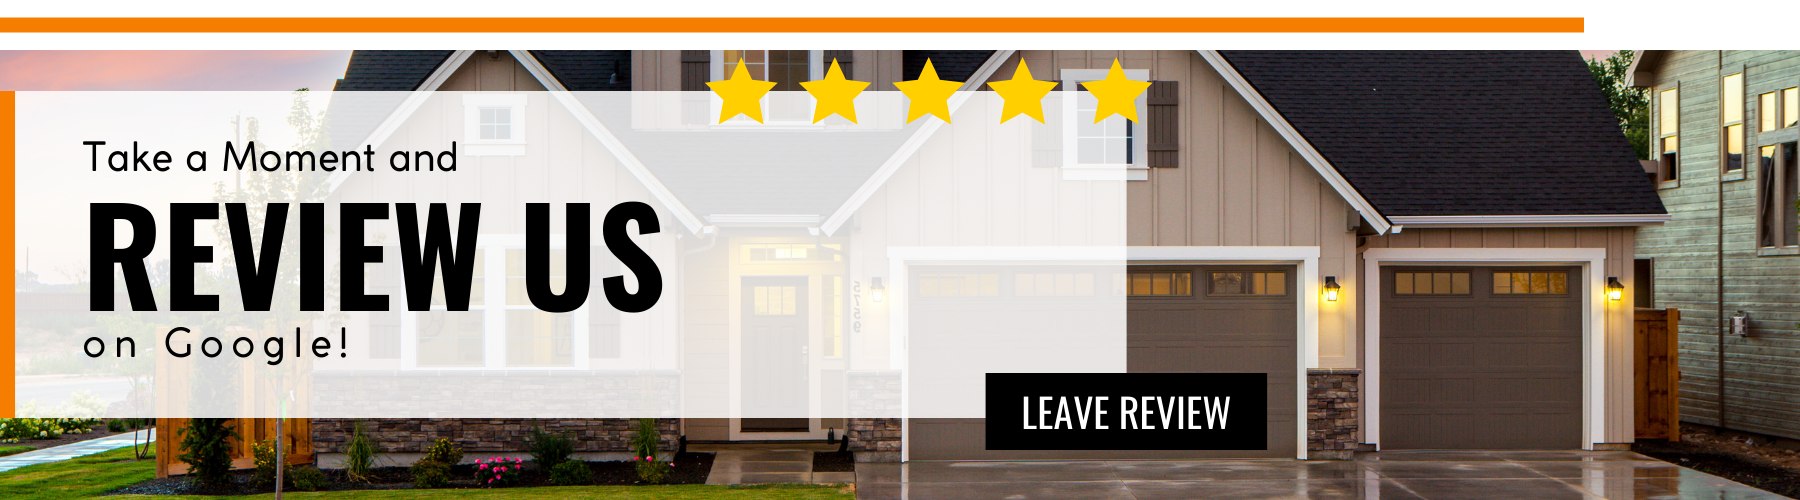 Leave review banner